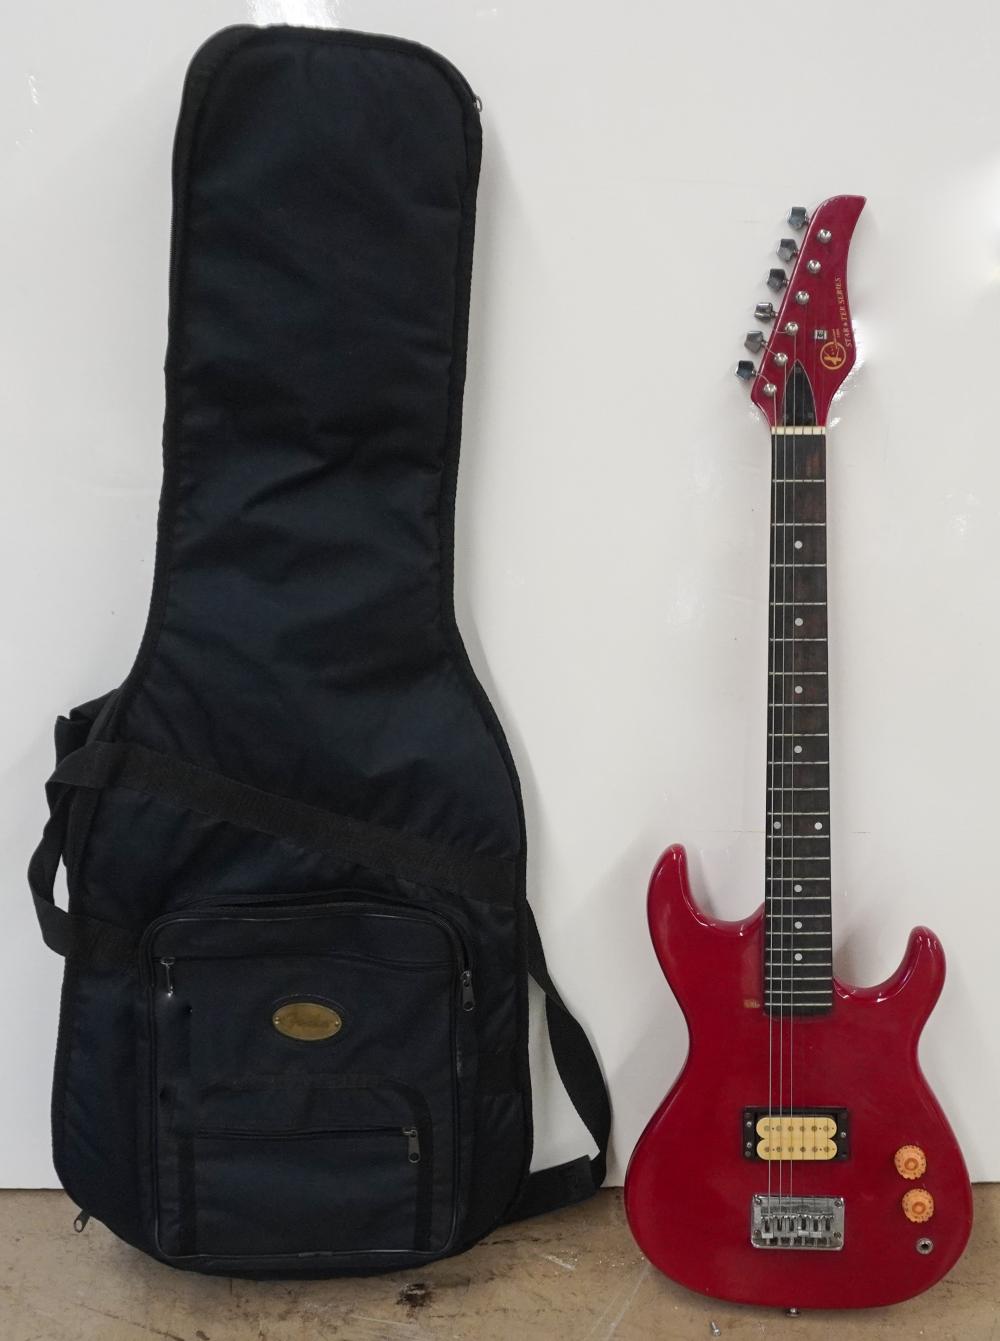 KAY ELECTRIC GUITAR WITH CARRYING 2e89c3